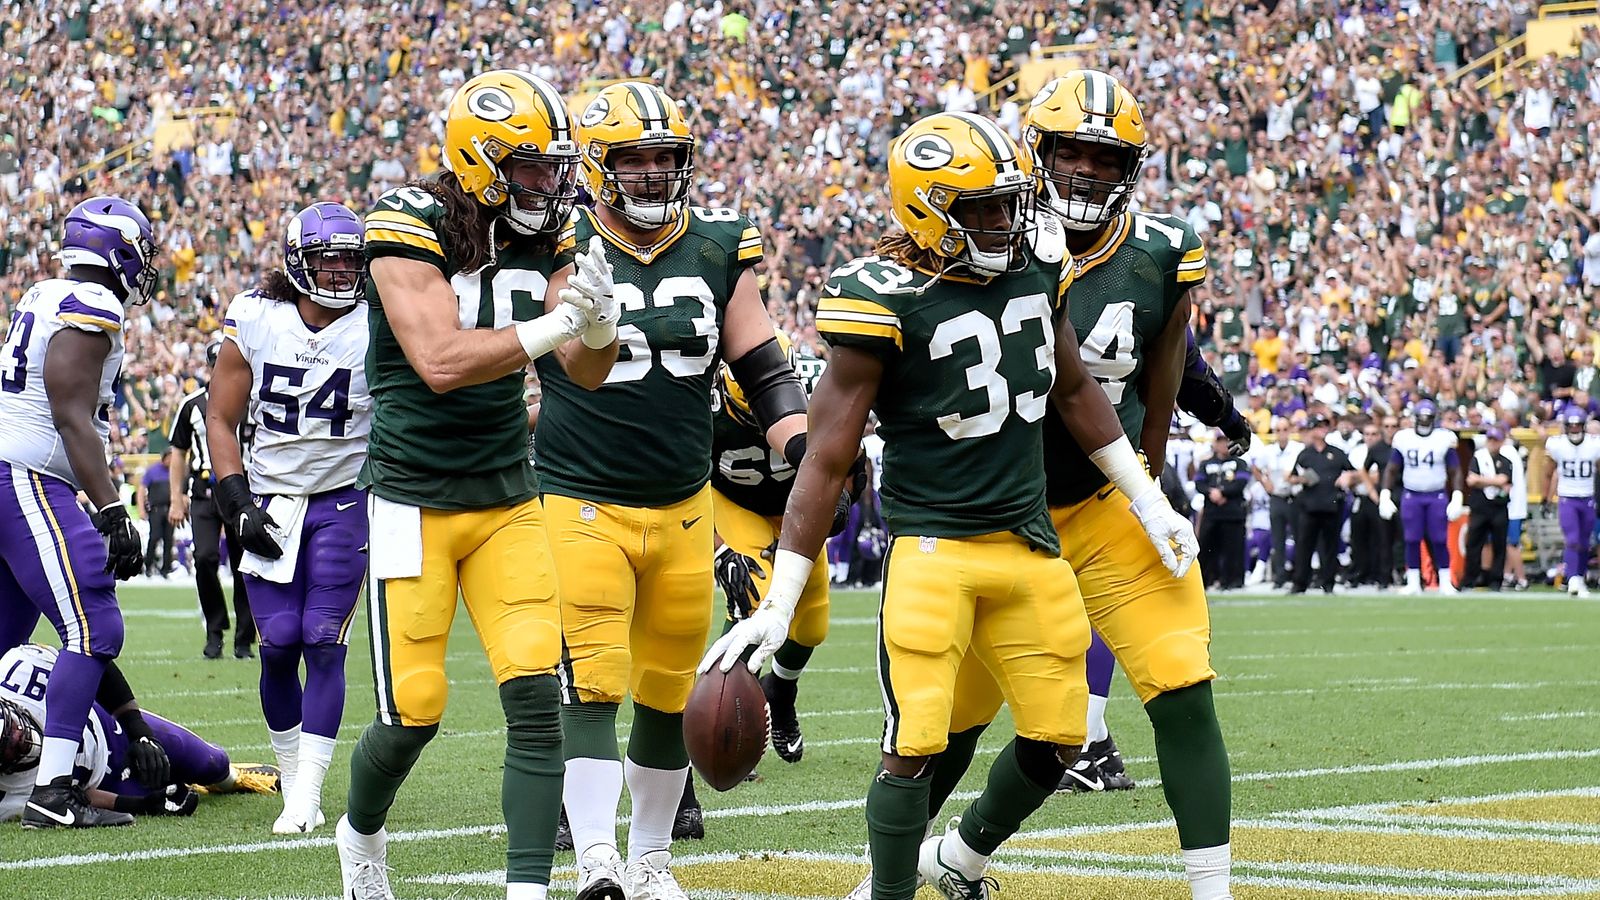 Minnesota Vikings 16-21 Green Bay Packers: Packers hold on in tense NFC Nor...